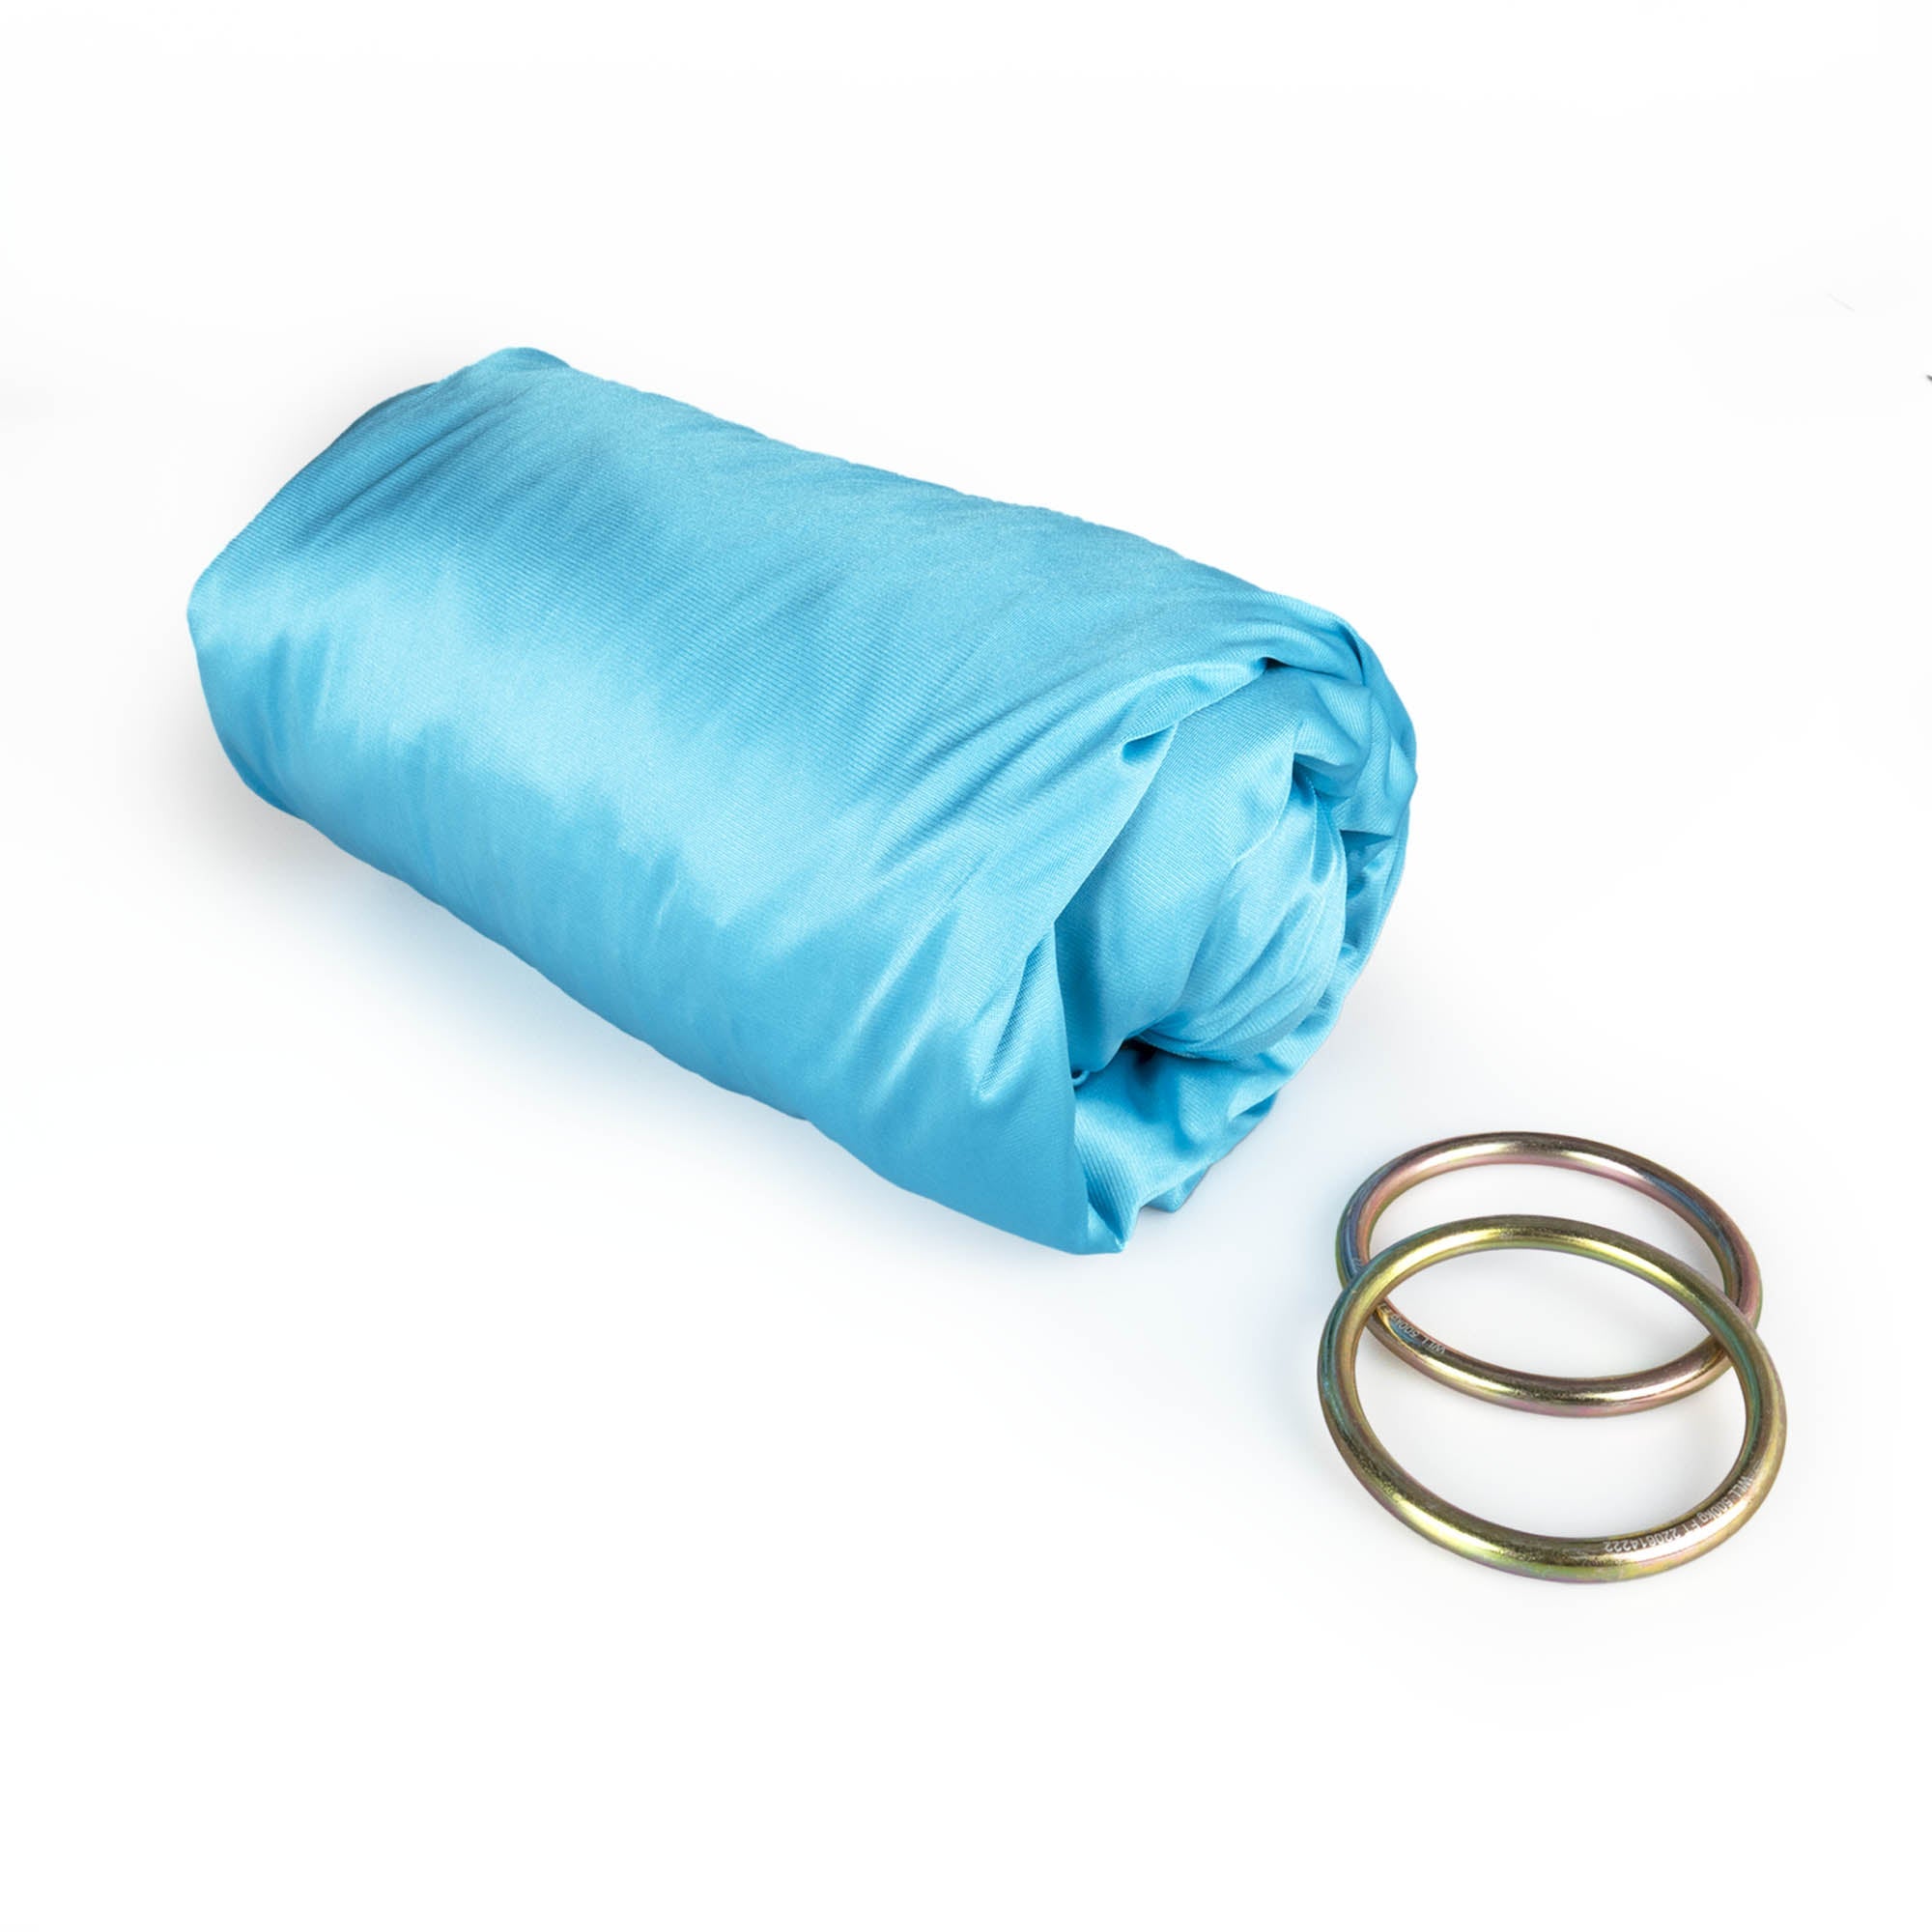 Turquoise yoga hammock rolled up with rings detached